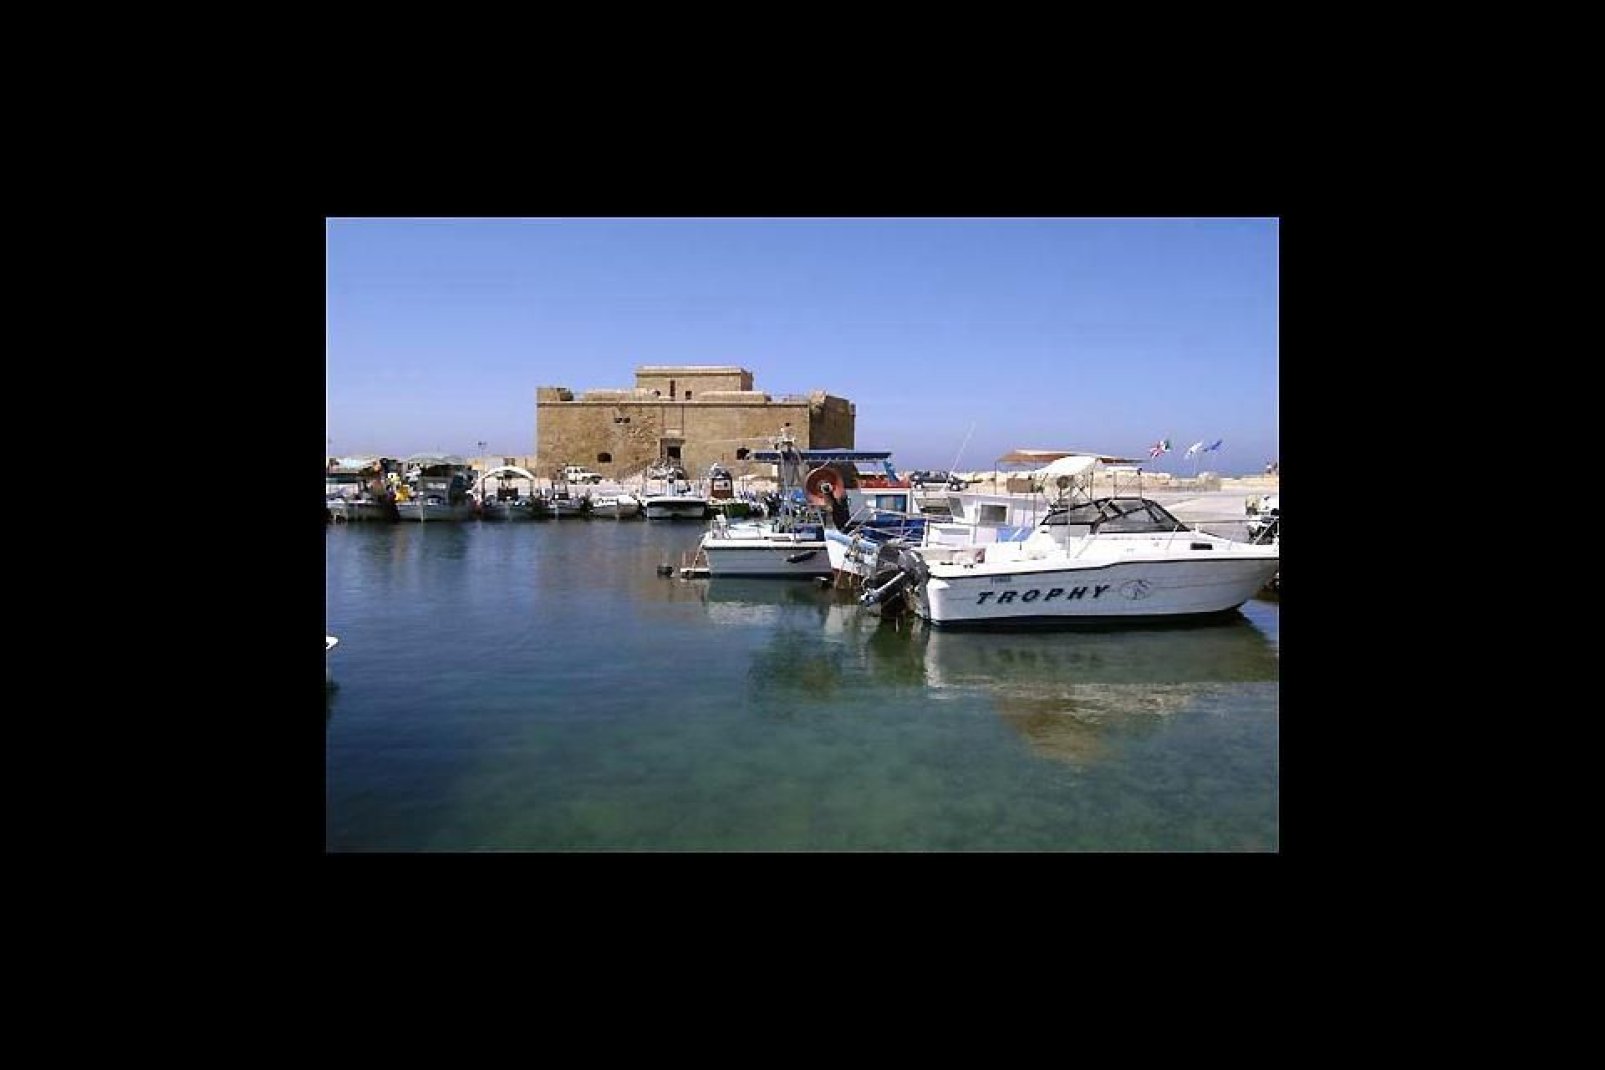 The ottoman fort of Paphos has watched over this harbor town since the XVIth century